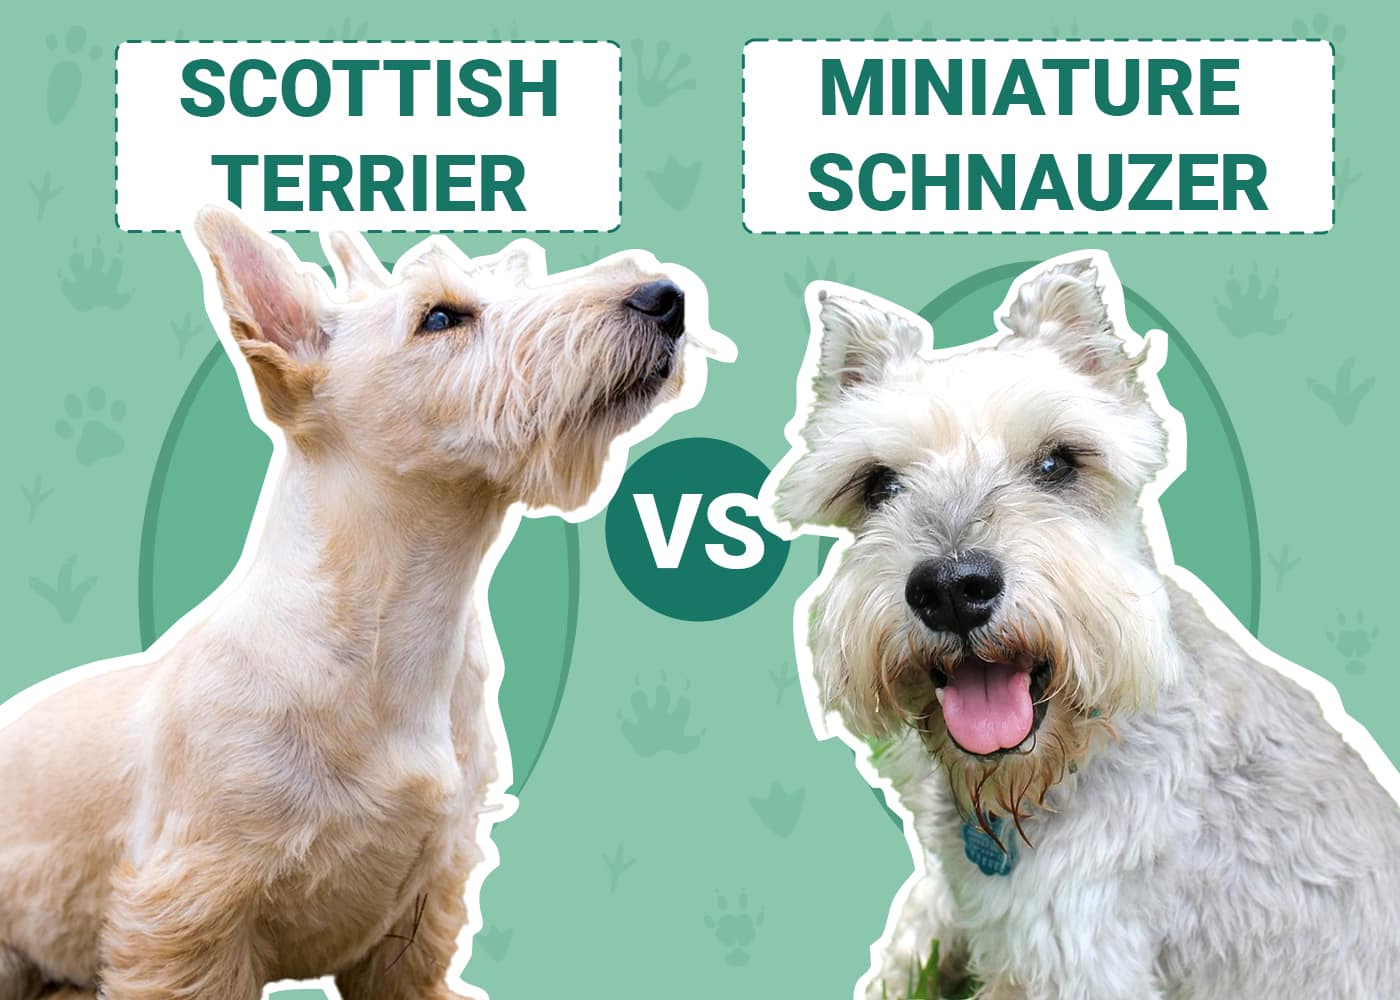 Miniature Schnauzer vs Scottish Terrier: Key Differences (With